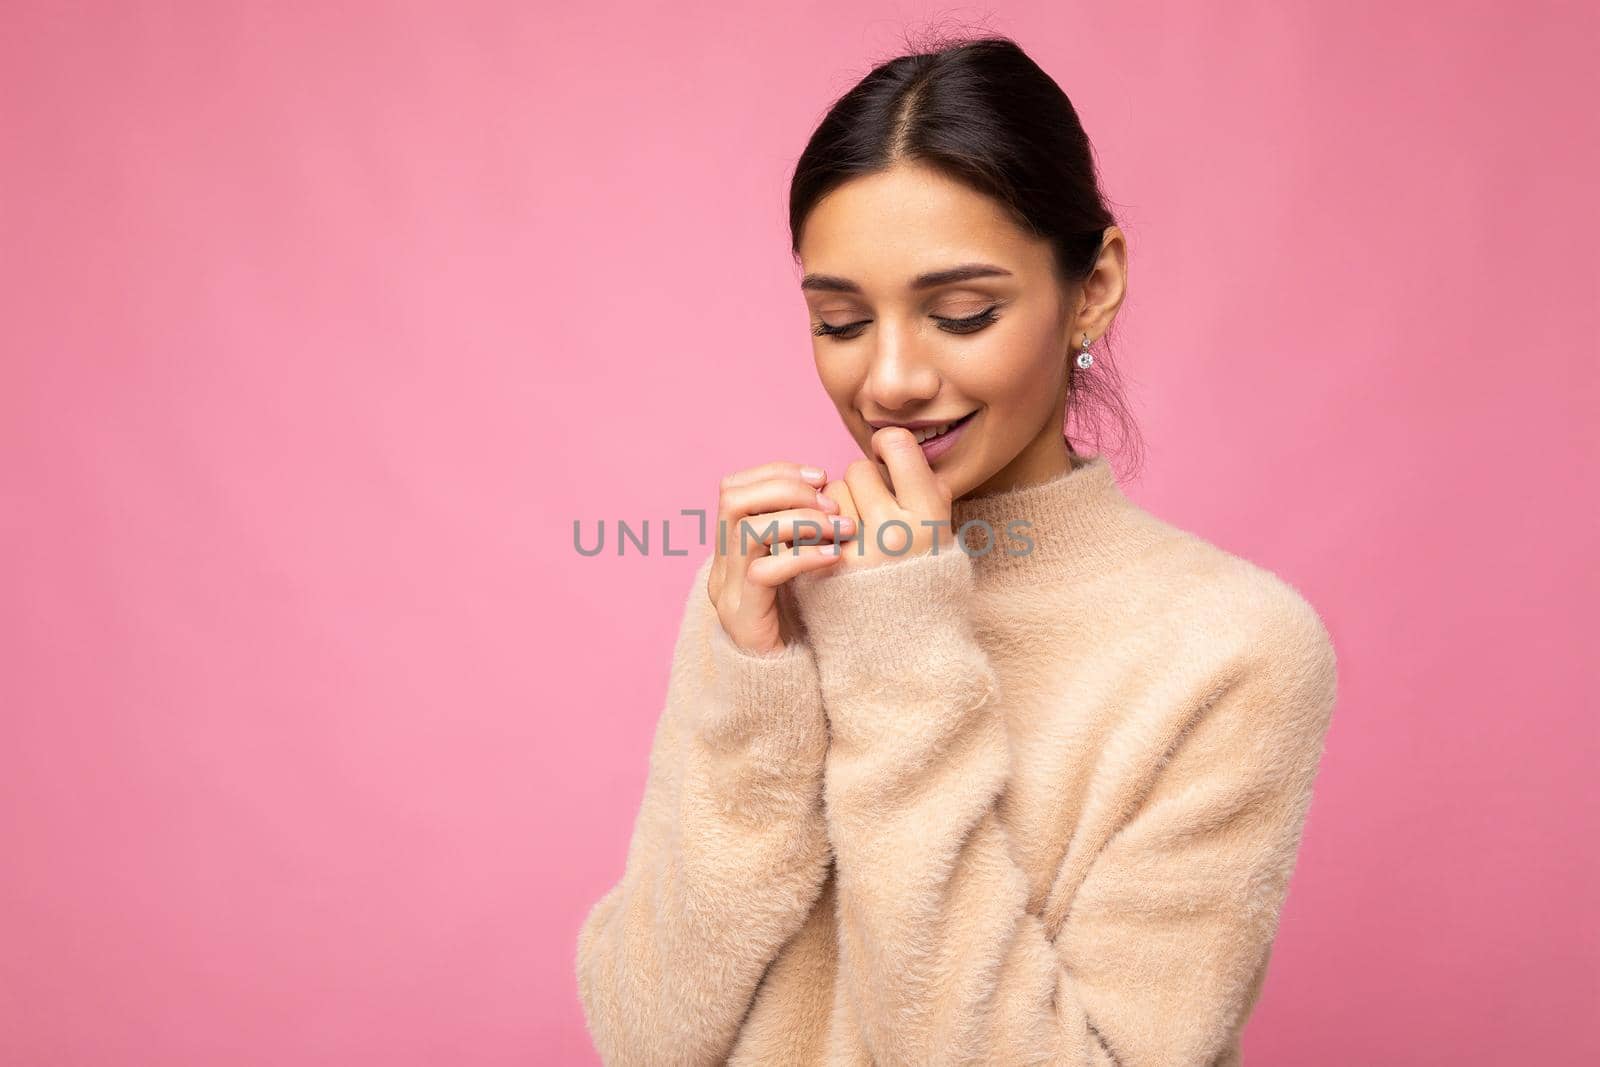 Portrait of young positive smiling tender winsome happy beautiful brunette woman with sincere emotions wearing casual beige jersey isolated over pink background with free space.